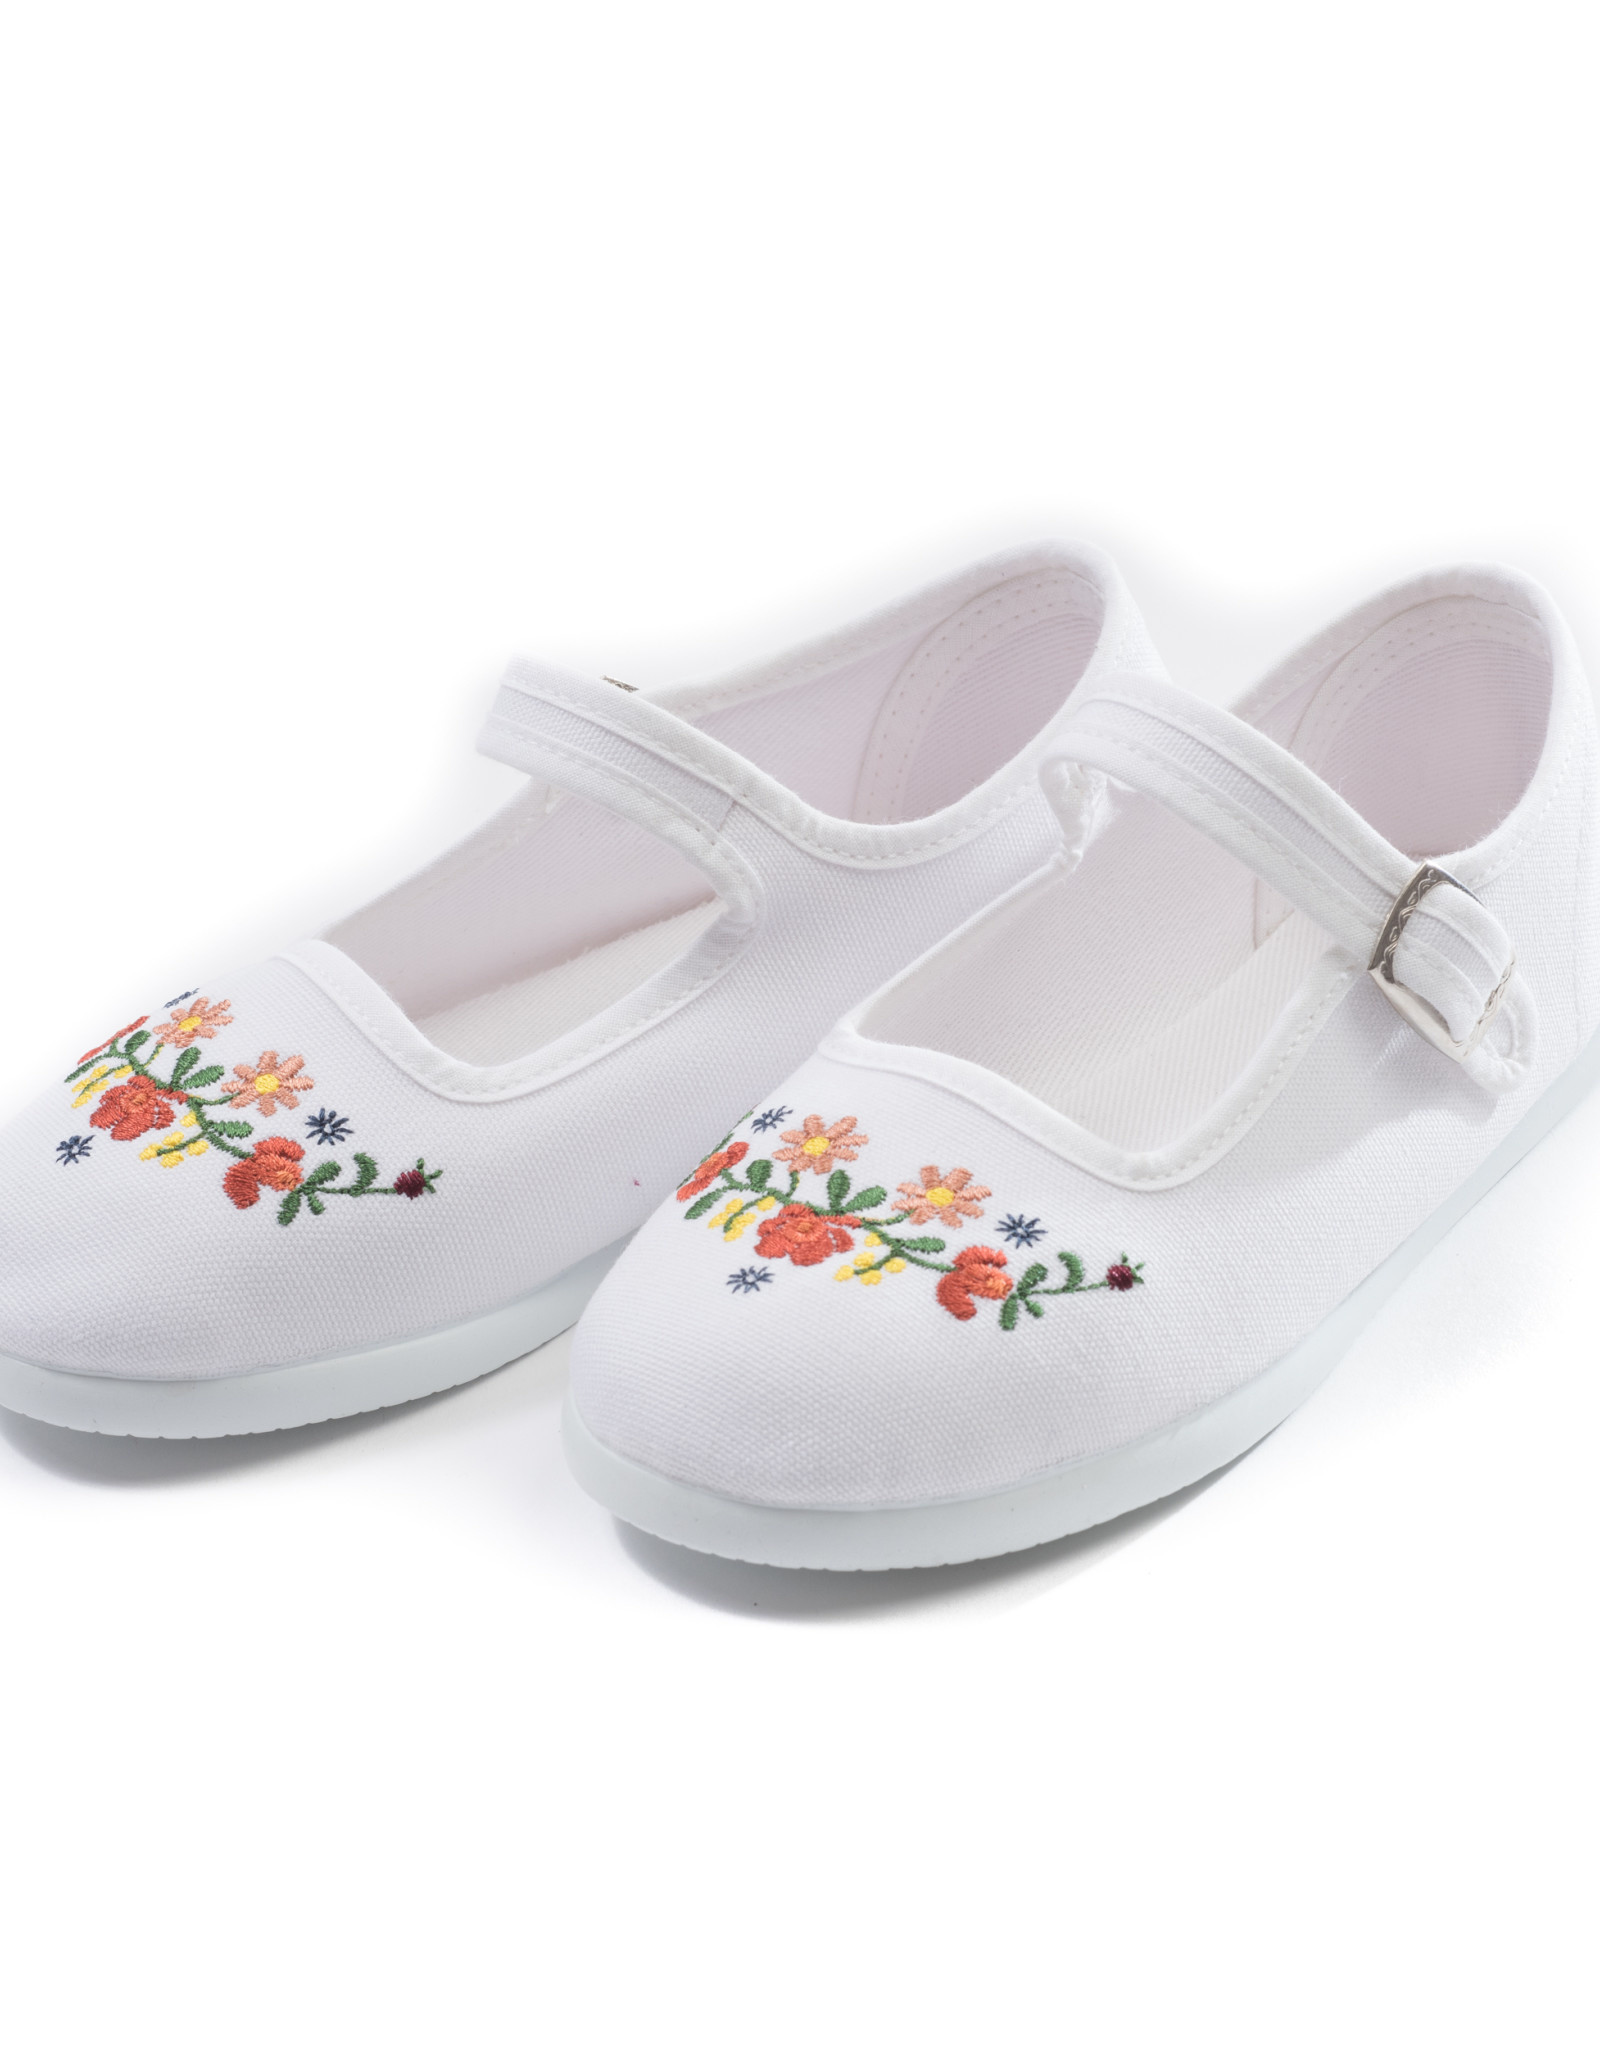 Bonton Embroidered shoes